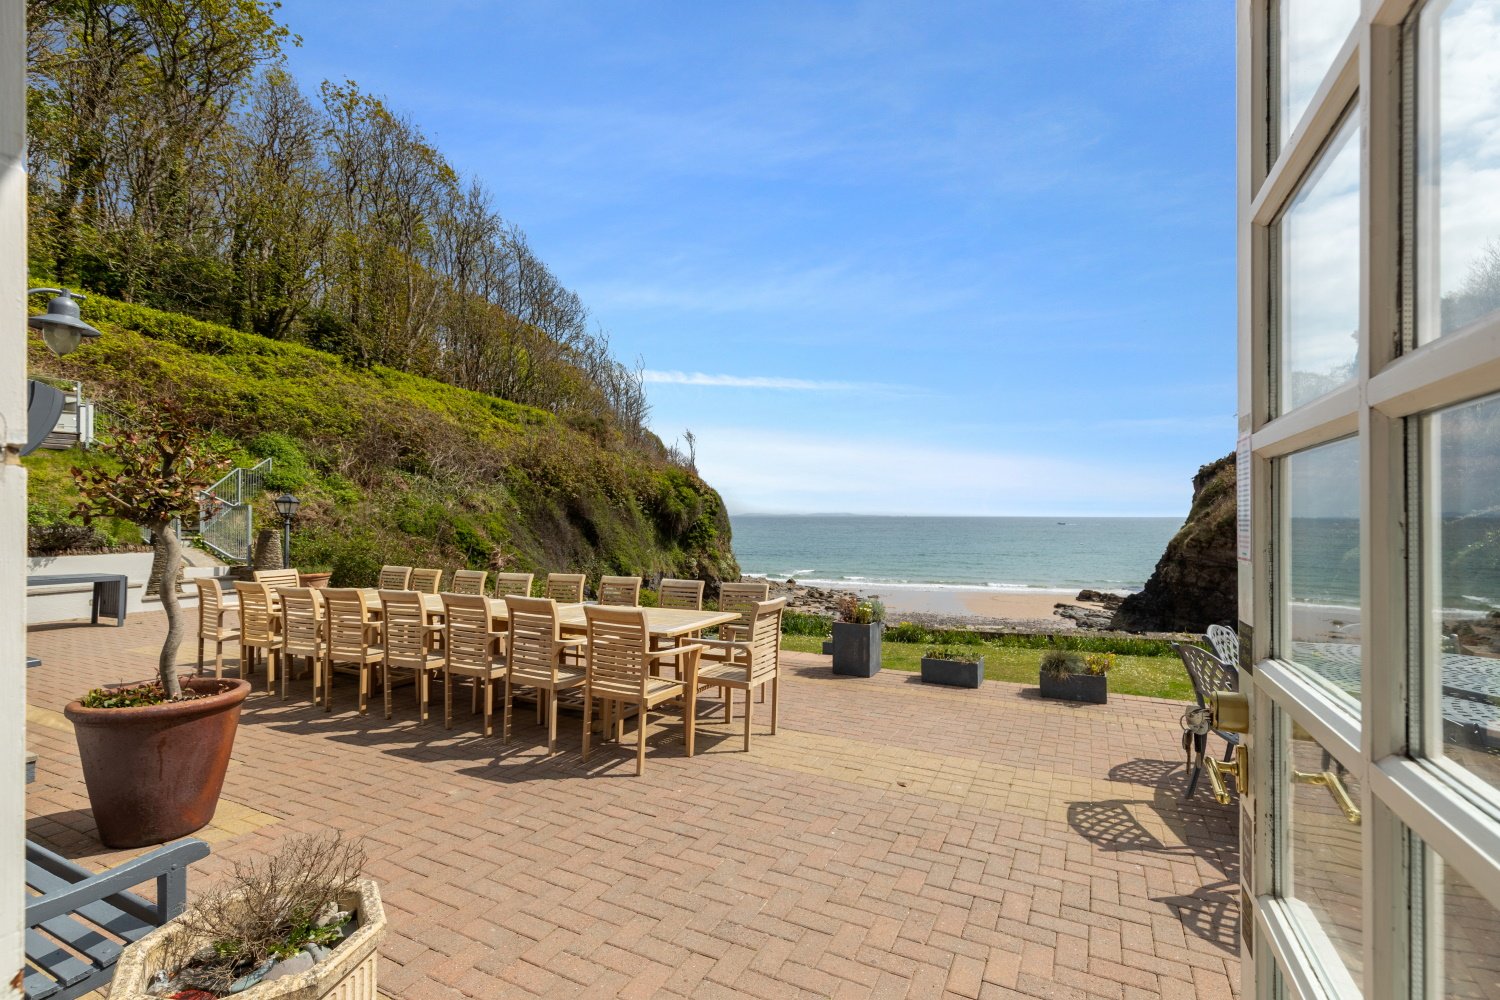 Waterwynch - outside dining on the patio with exceptional views